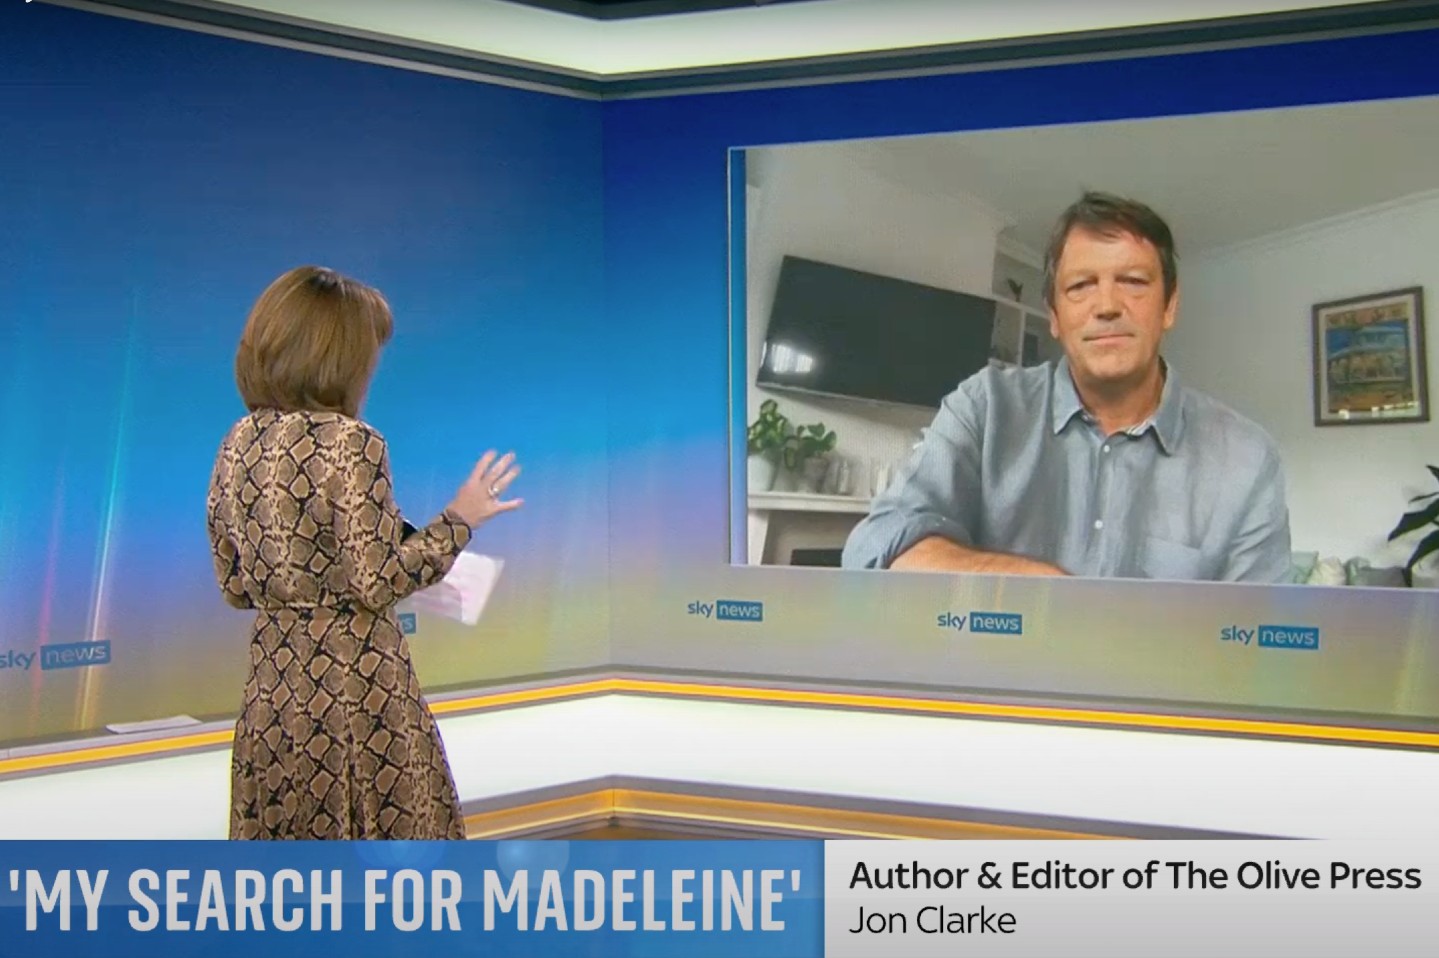 Madeleine Mccann Could Still Be Alive Olive Press Editor Tells Sky News To Promote A New Book On Portugal Case Olive Press News Spain